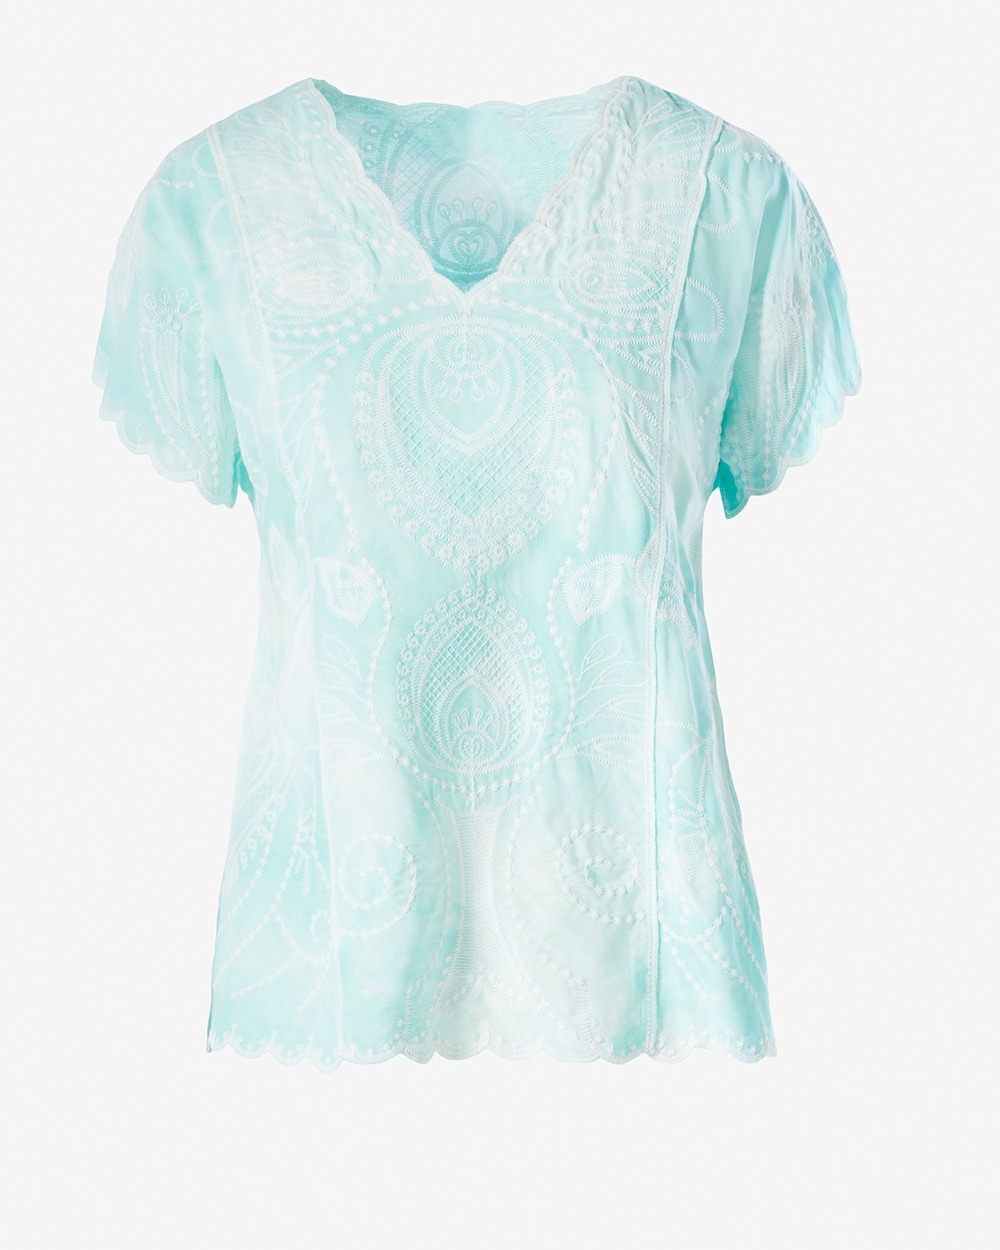 Tie-Dye Embroidered Top